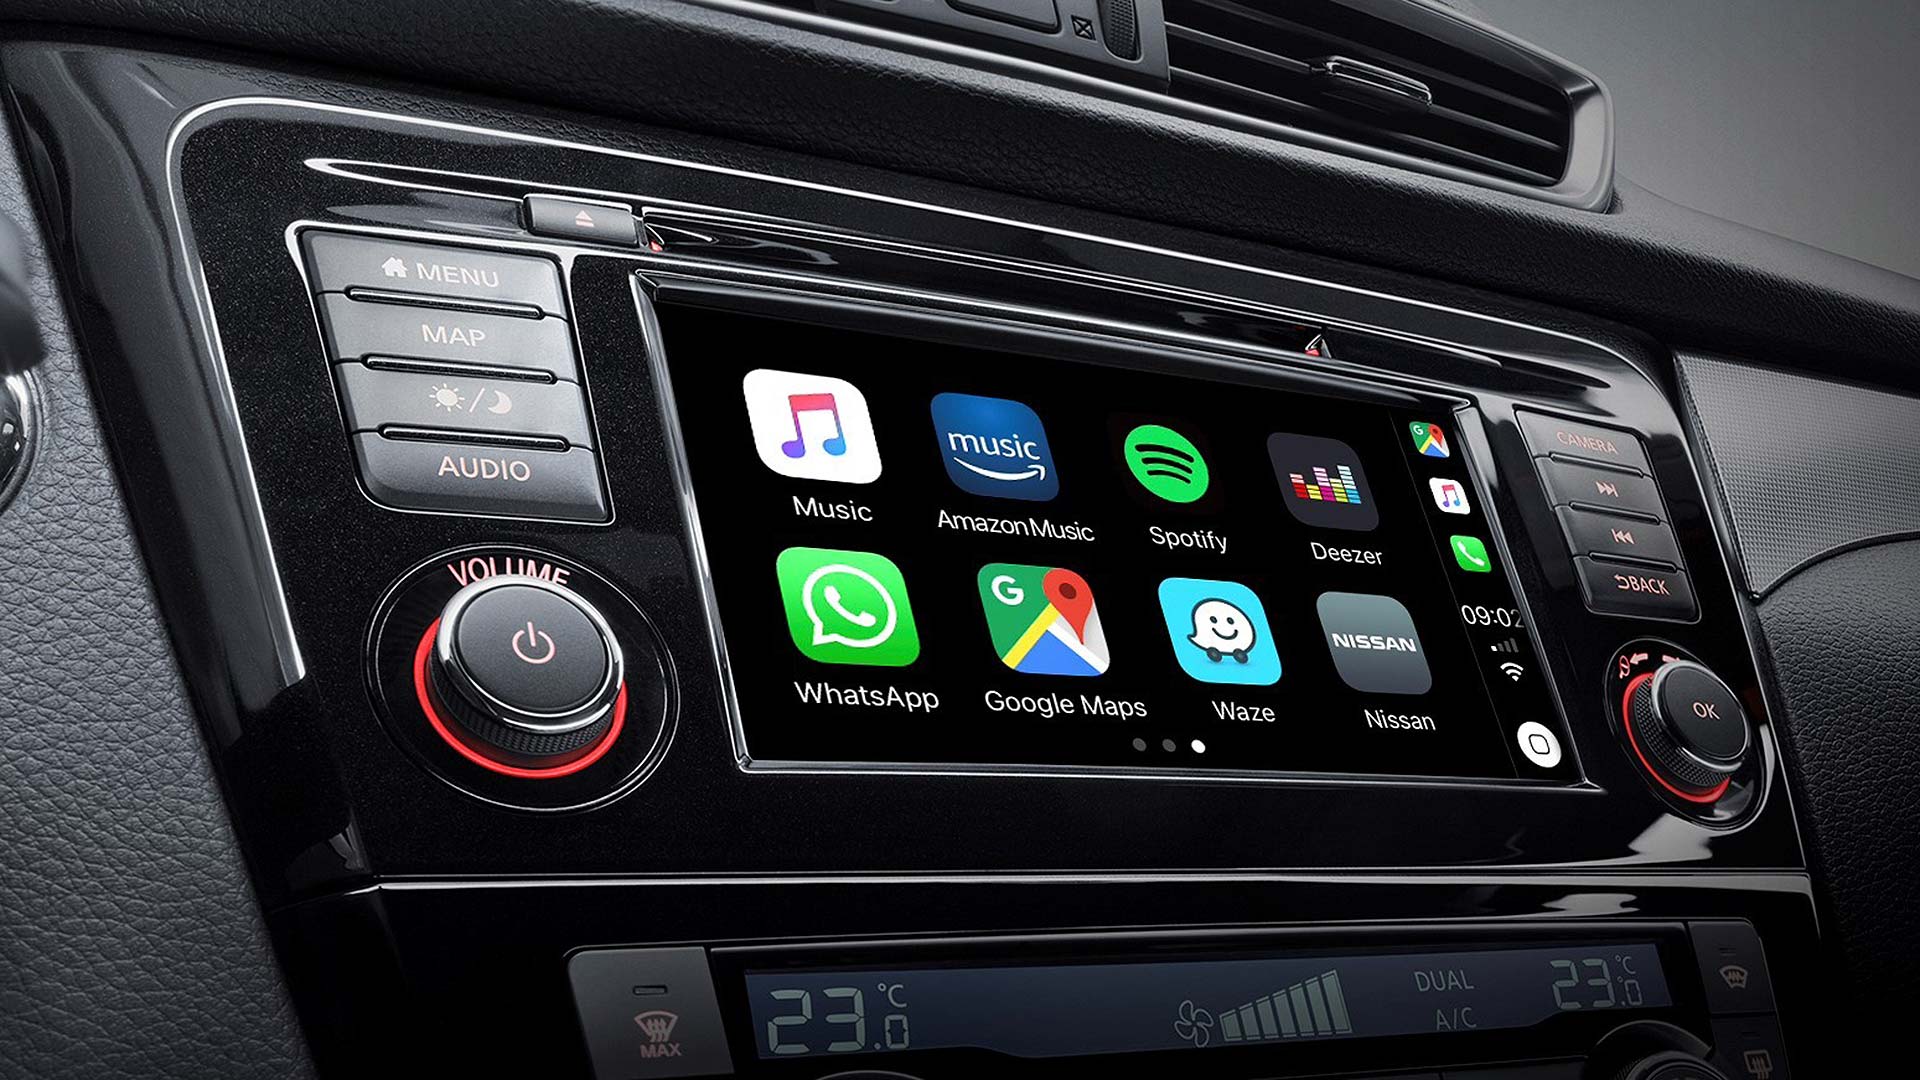 2019 nissan qashqai gets apple carplay and android auto at last motoring research